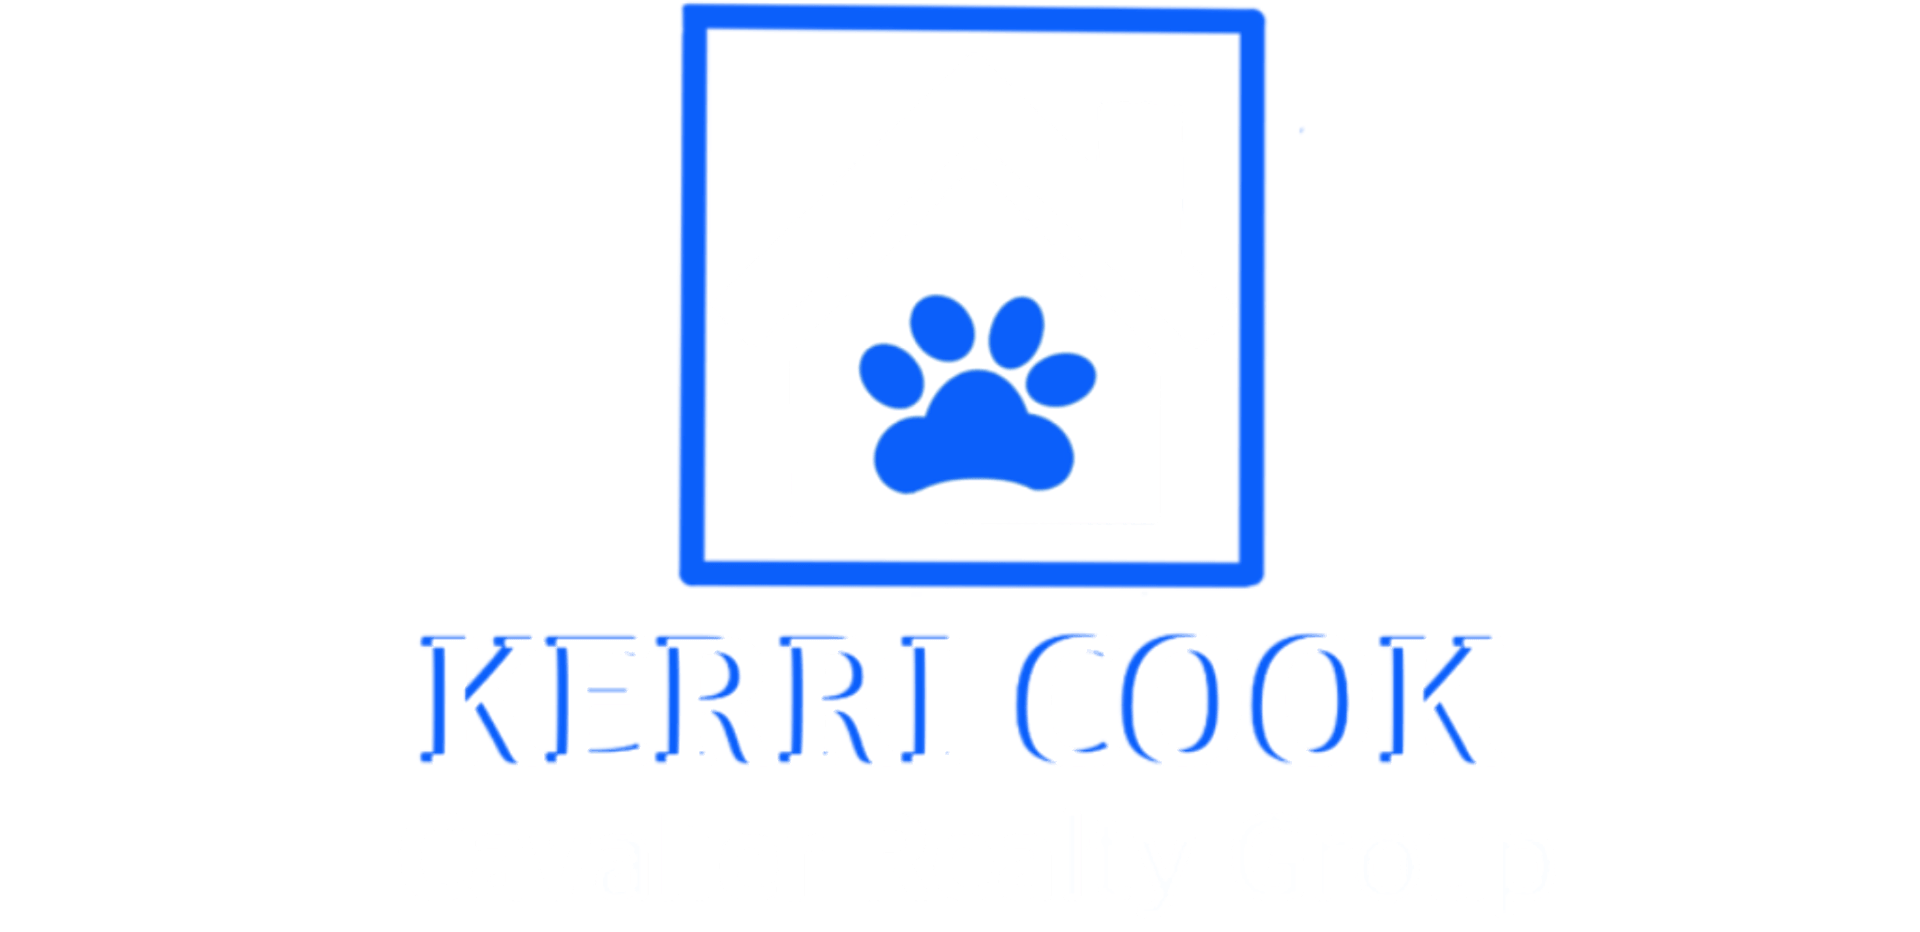 A blue paw print in a square with the words kerri cook below it.